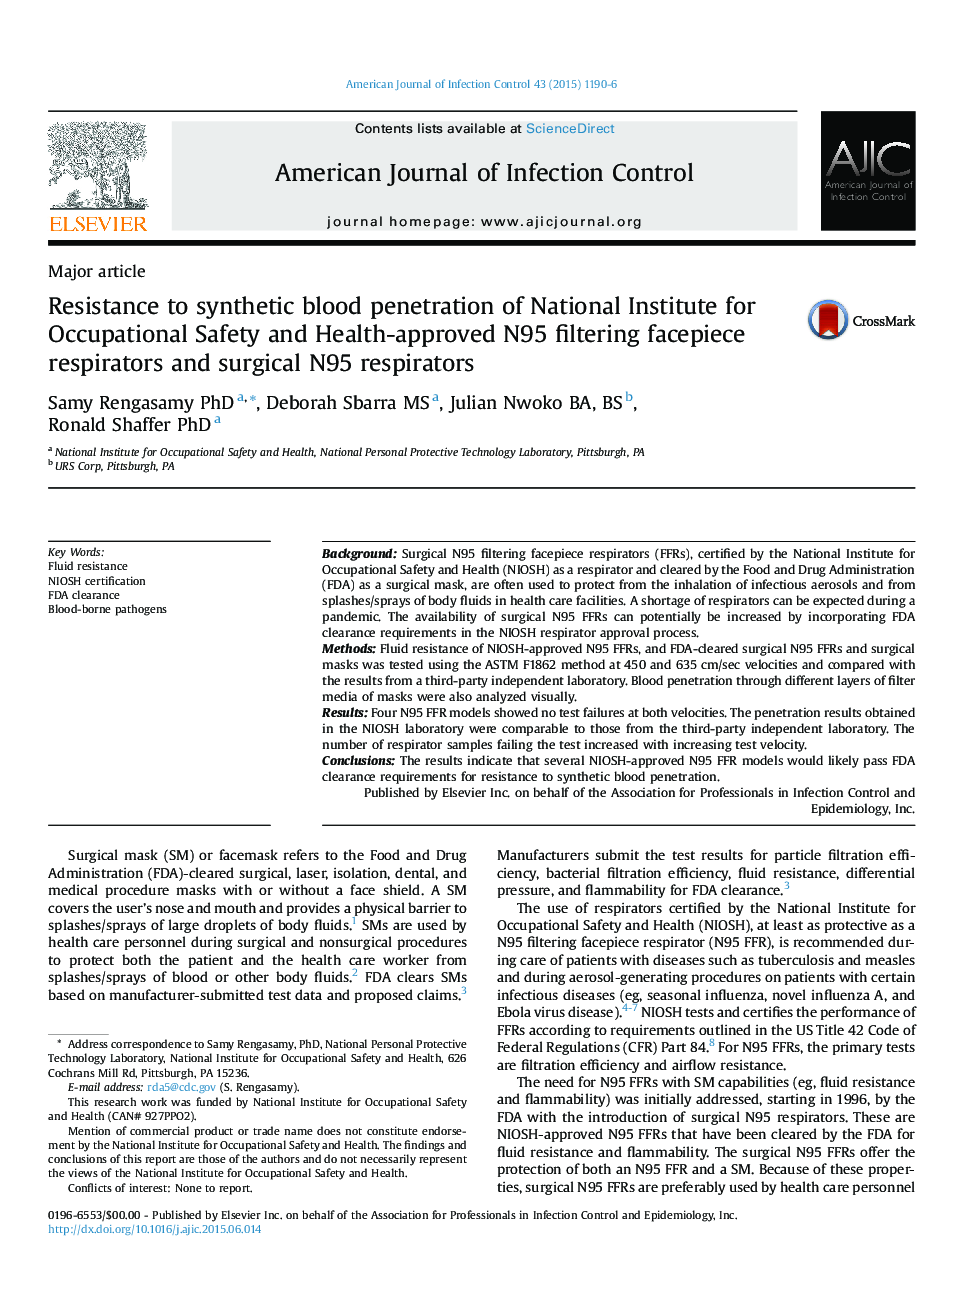 Resistance to synthetic blood penetration of National Institute for Occupational Safety and Health-approved N95 filtering facepiece respirators and surgical N95 respirators